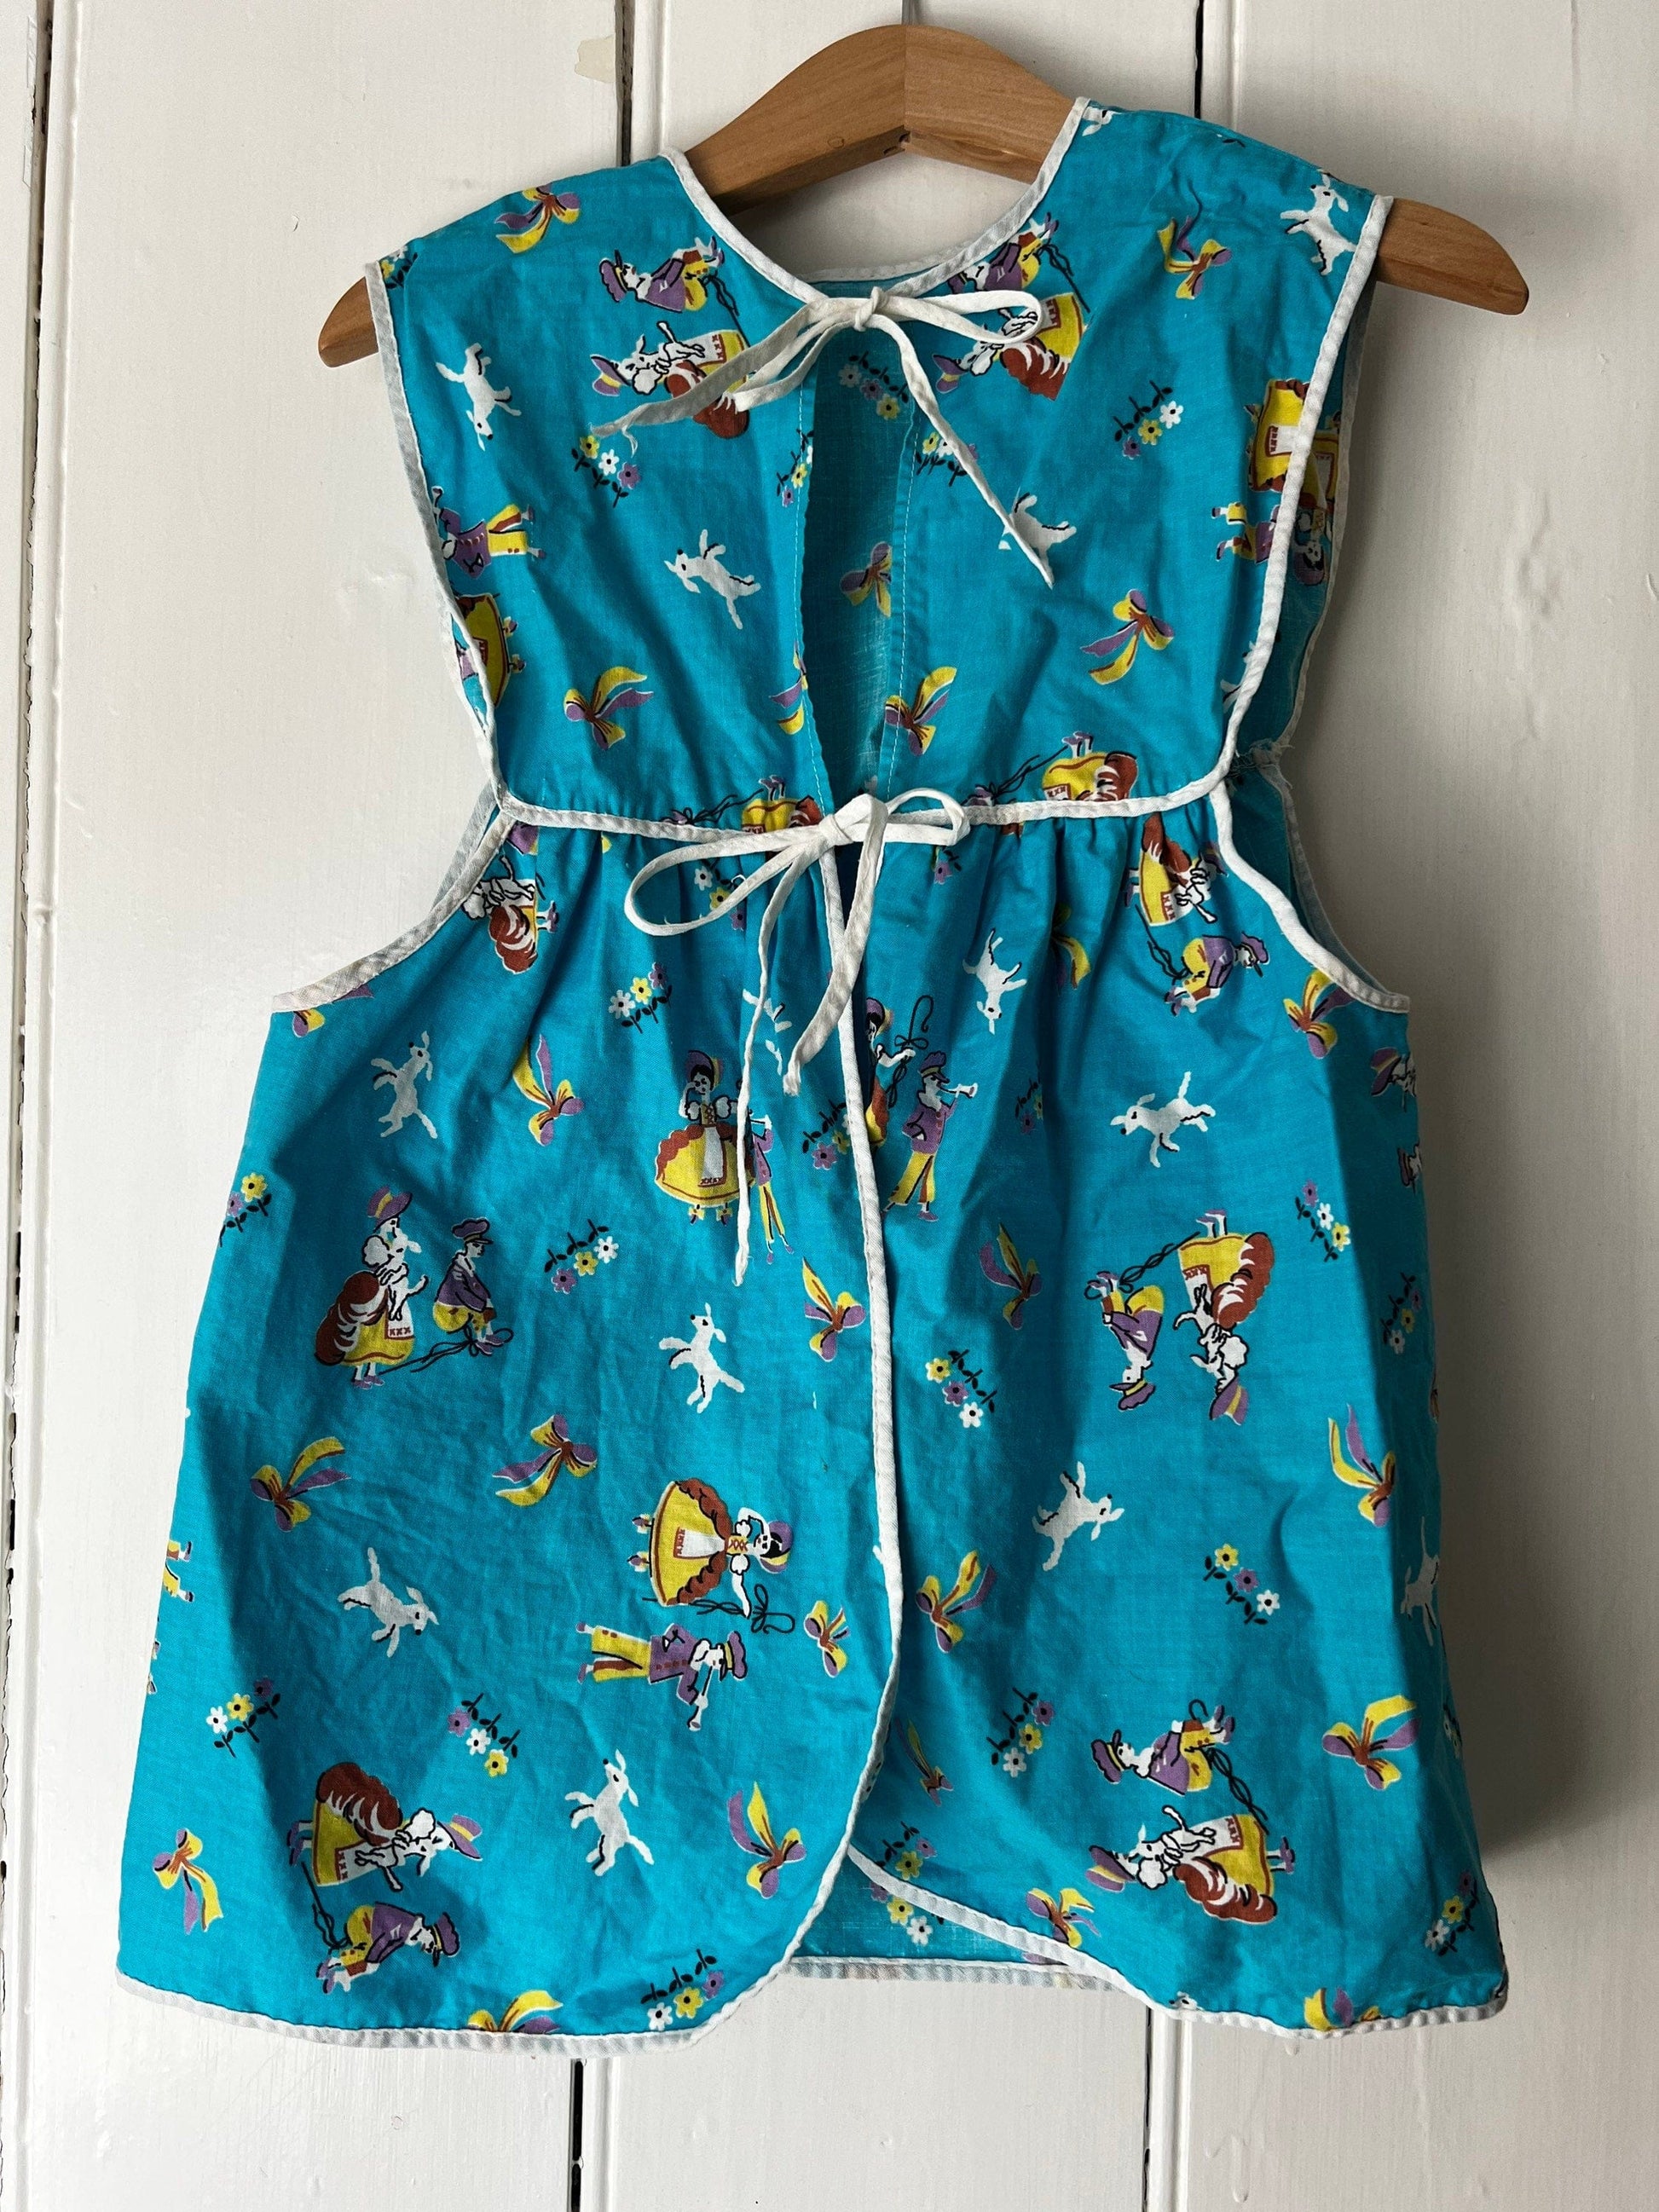 Vintage Girls Pinafore Dress - Blue Over Dress Baby Dress 2-3 years